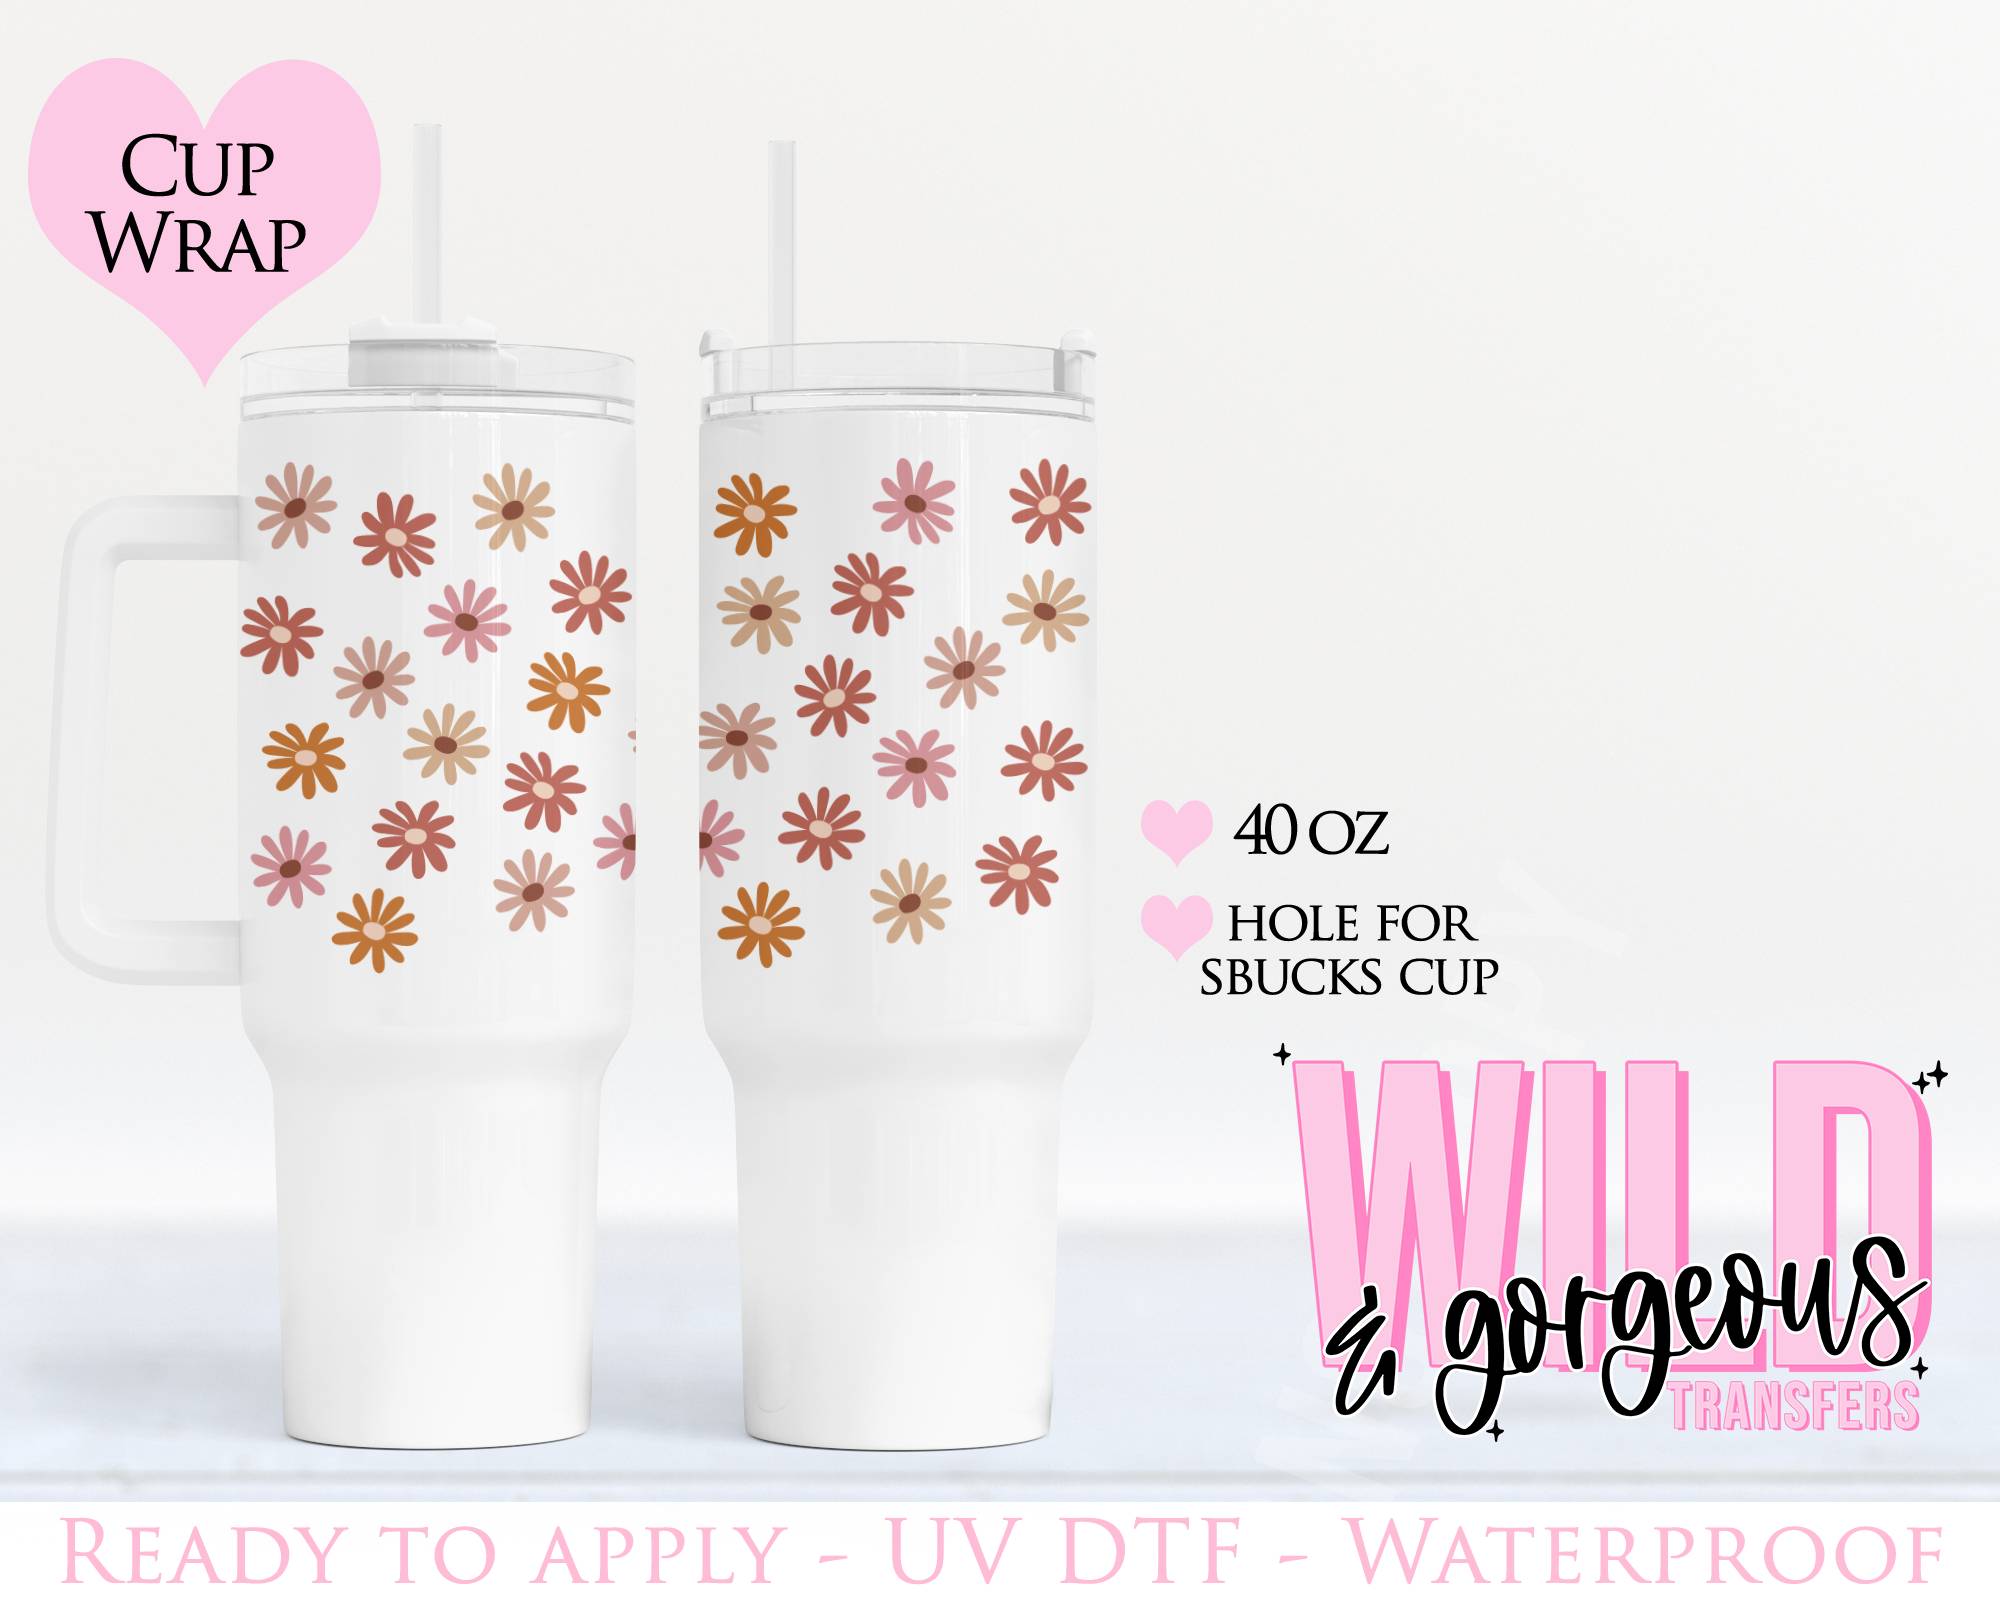 Tumbler Cup Flowers Decal, Retro Groovy Stanley Tumbler